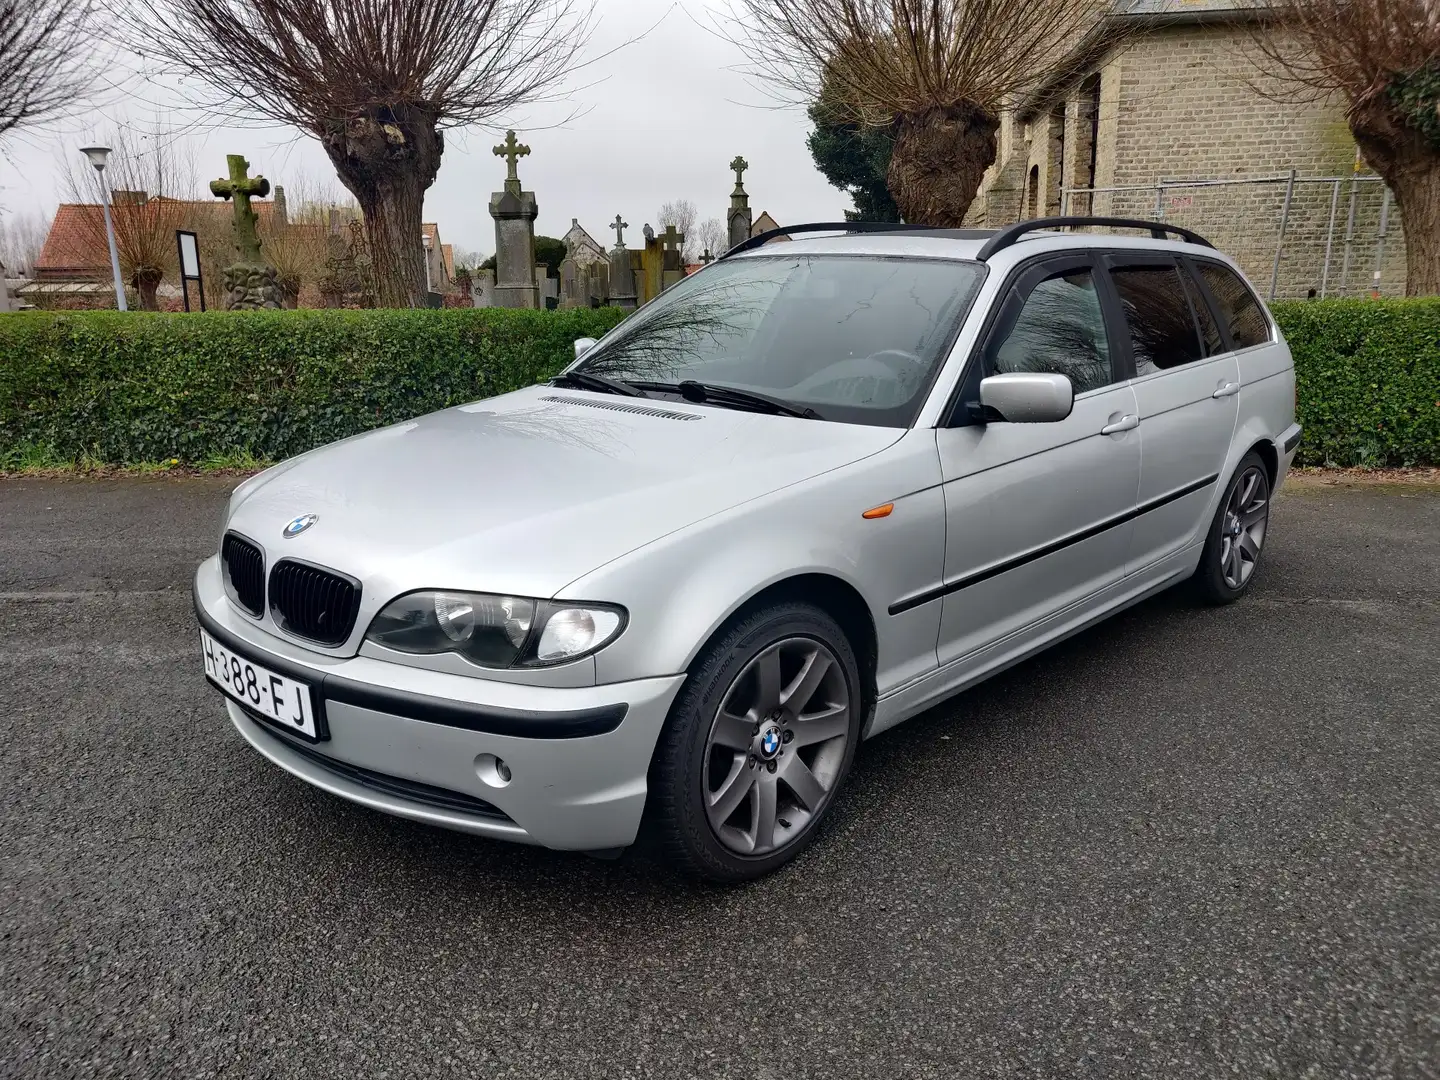 BMW 325 325Xi Touring - automatic - petrol & LPG Argent - 1